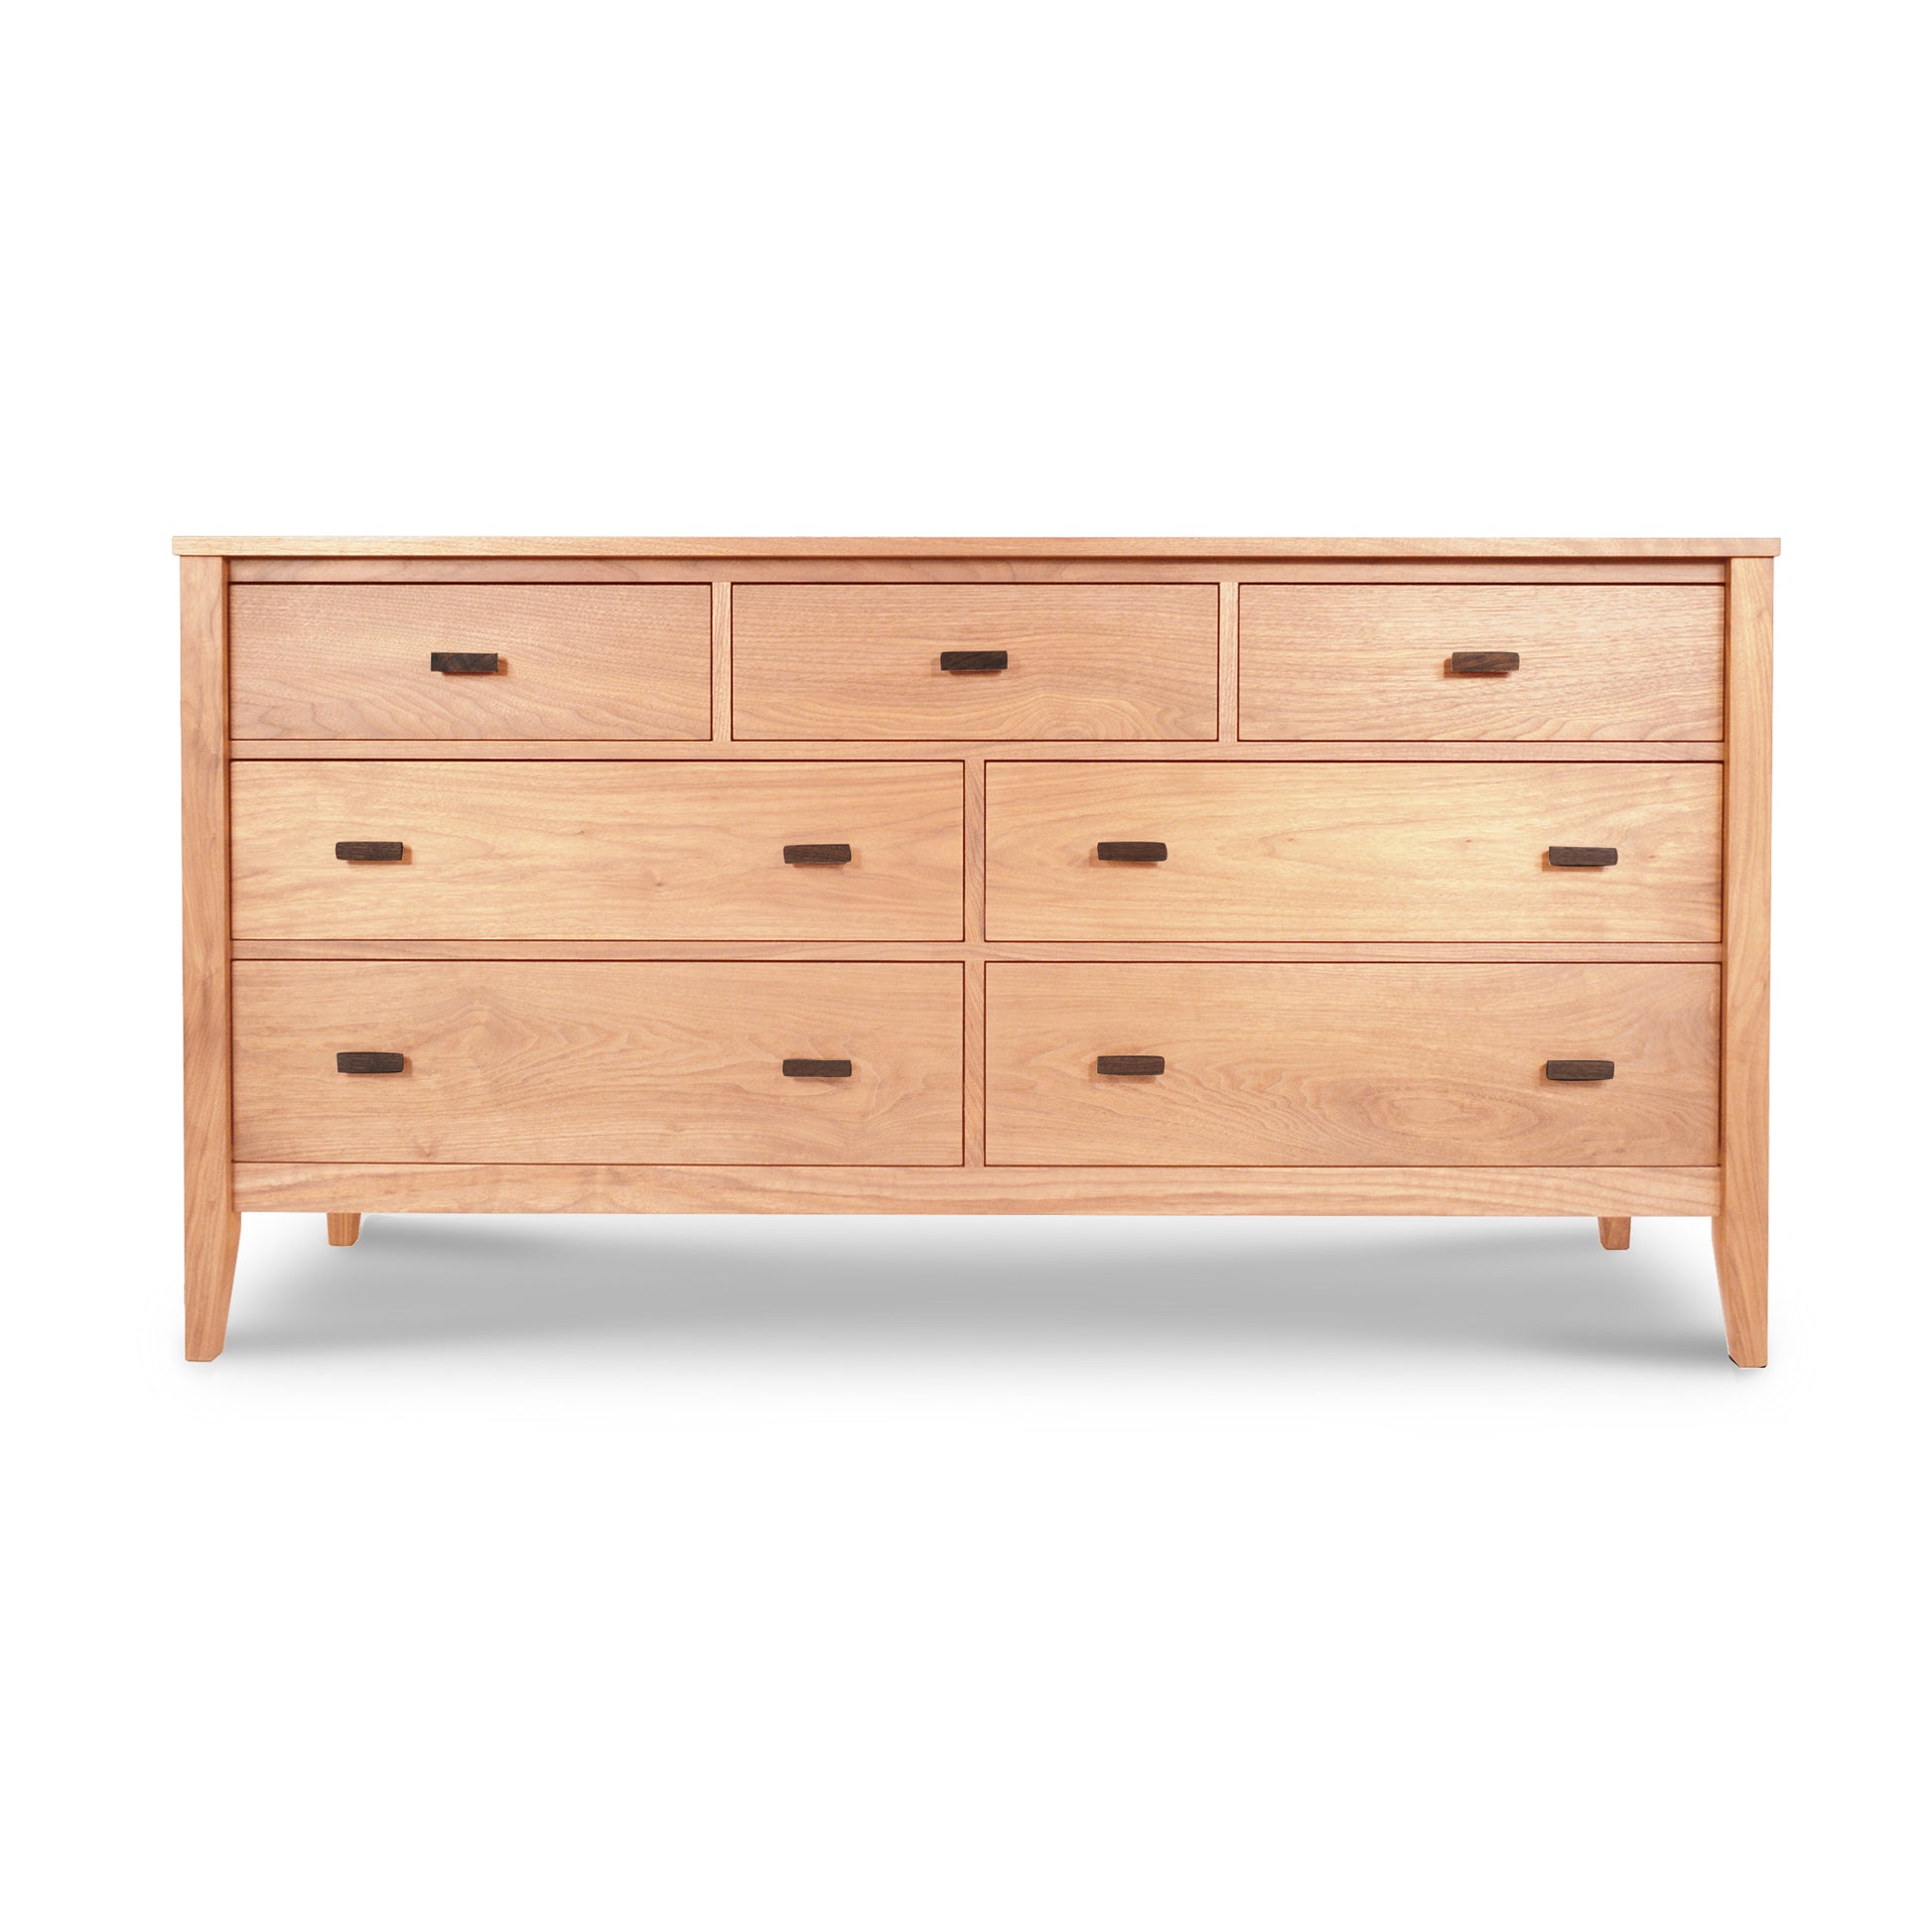 An eco-friendly Andover Modern 7-Drawer Dresser with seven drawers and round handles, featuring a natural cherry finish and angled legs, isolated on a white background. (Maple Corner Woodworks)